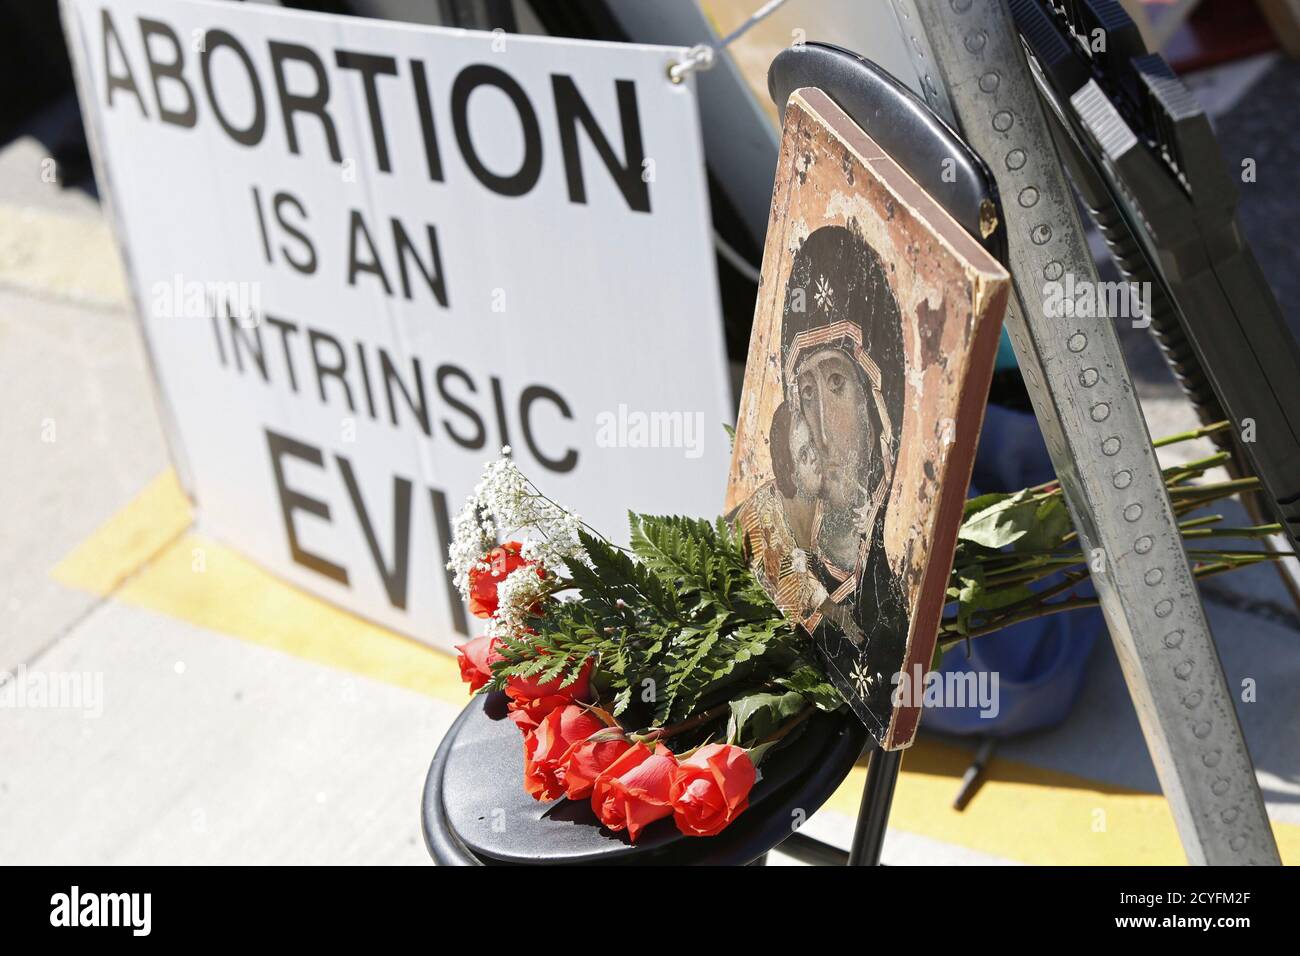 A sign with flowers and a portrait of Jesus is seen in front of a Planned Parenthood clinic in Boston, Massachusetts, June 28, 2014. Massachusetts is beefing up security around abortion clinics and scrambling for a legal fix after the U.S. Supreme Court voided the state's buffer zone law that kept protesters 35 feet away, saying it violated freedom of speech. Boston, Worcester and Springfield, the state's largest cities, have deployed extra police to clinics, and abortion-provider Planned Parenthood said it was training new 'patient escorts' to help women through protests if needed. REUTERS/Do Stock Photo